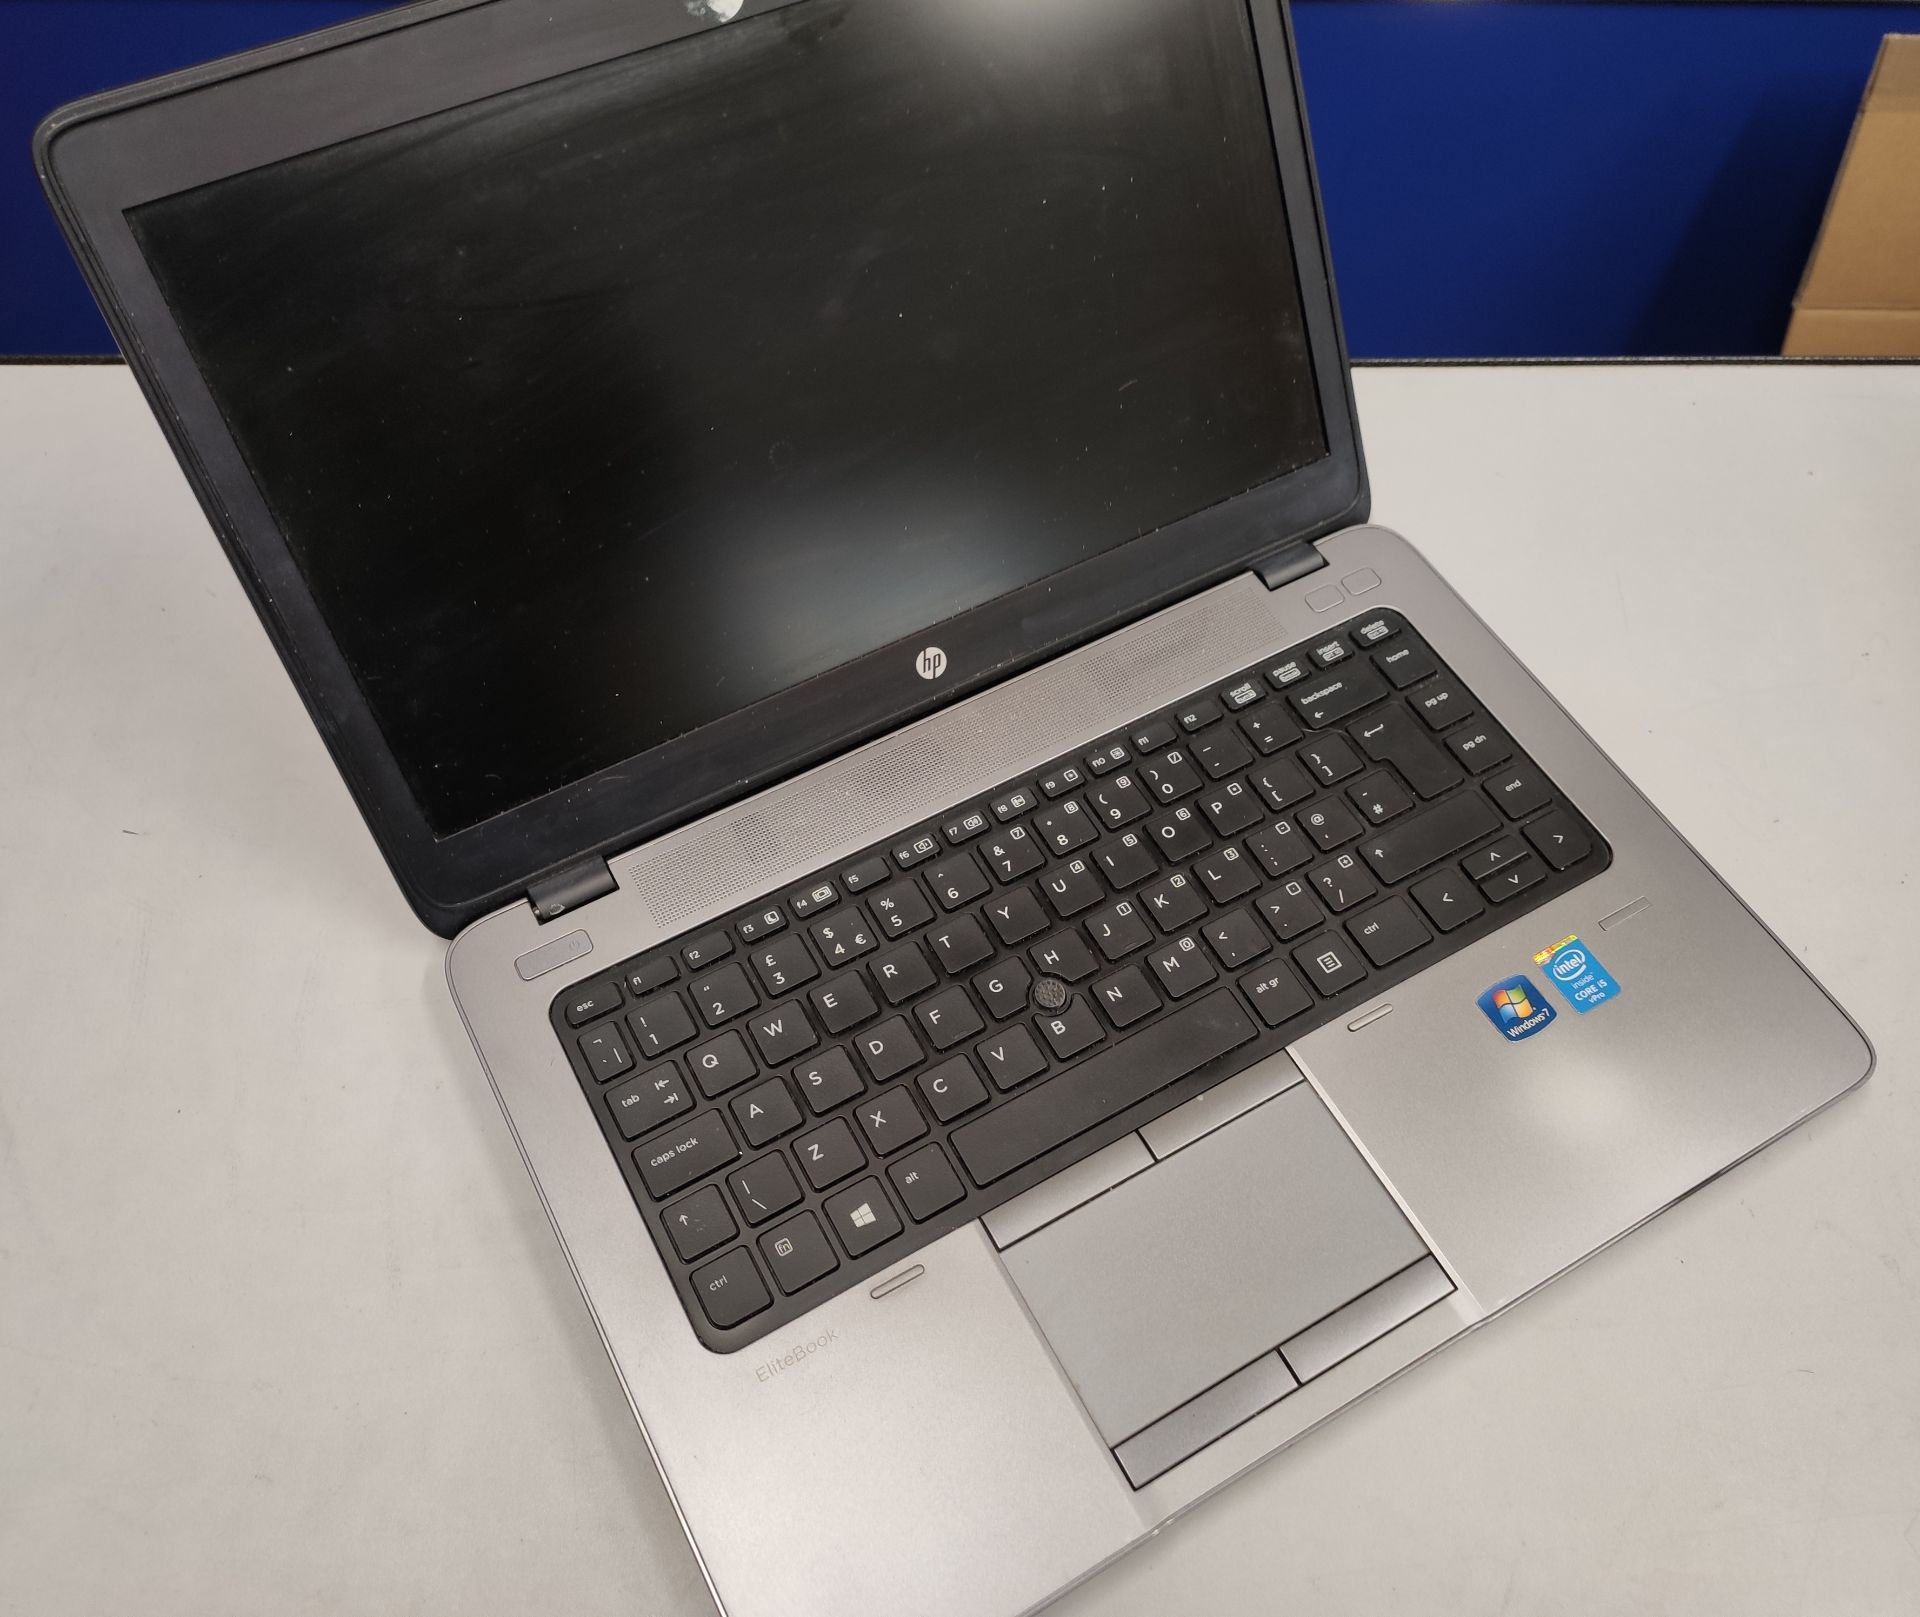 A pre-owned HP EliteBook 840 G1 14" Core i5 Laptop in Black (Serial: 5CG4421RSJ) (HDD removed, no